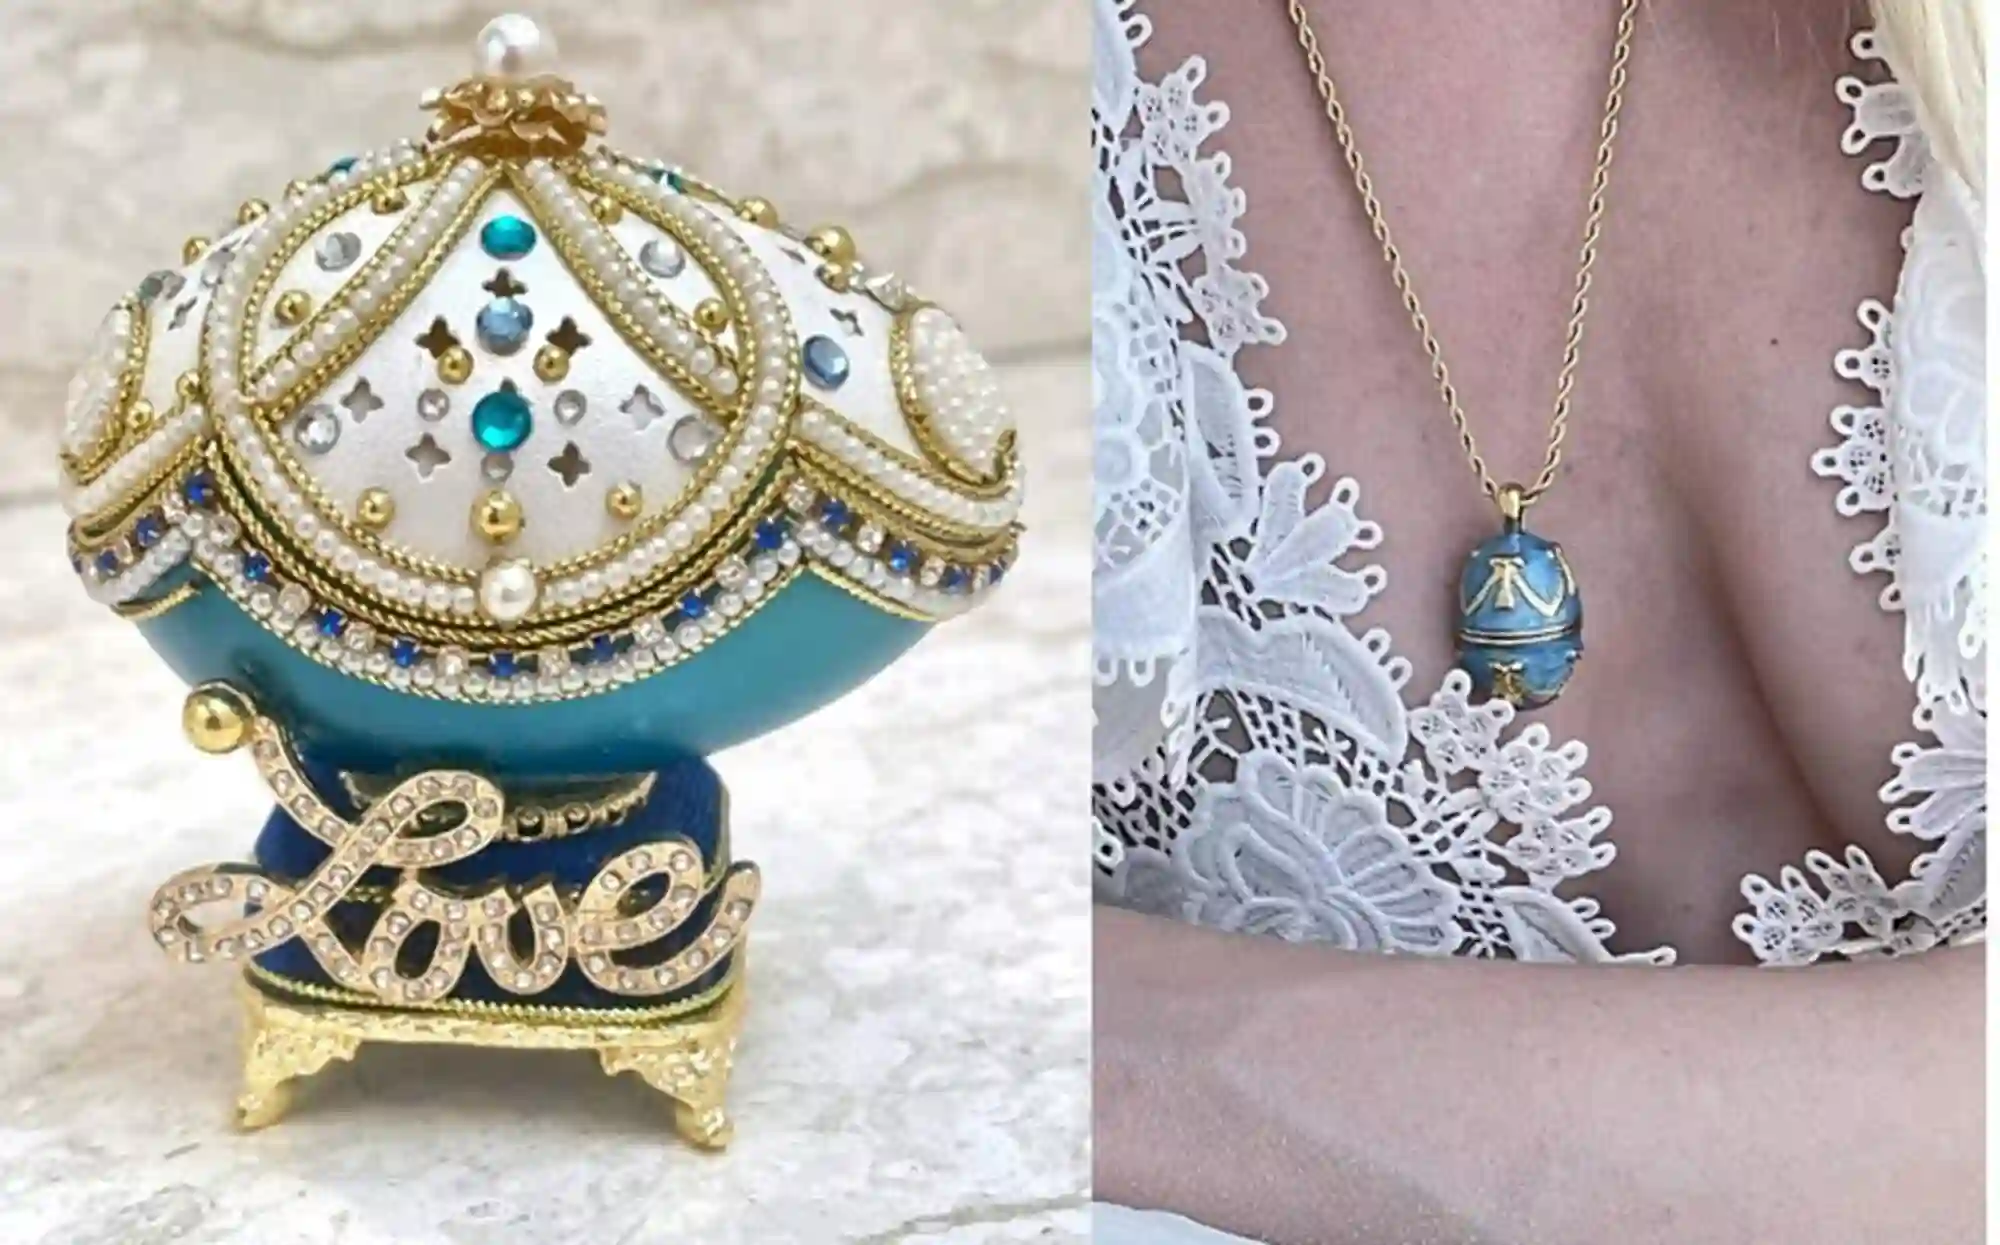 1999 One OfA Kind Faberge egg Blue Trinket & Necklace for Mom 25 year Wedding Anniversary gift for Her 25th Birthday gift for Daughter LOVE 